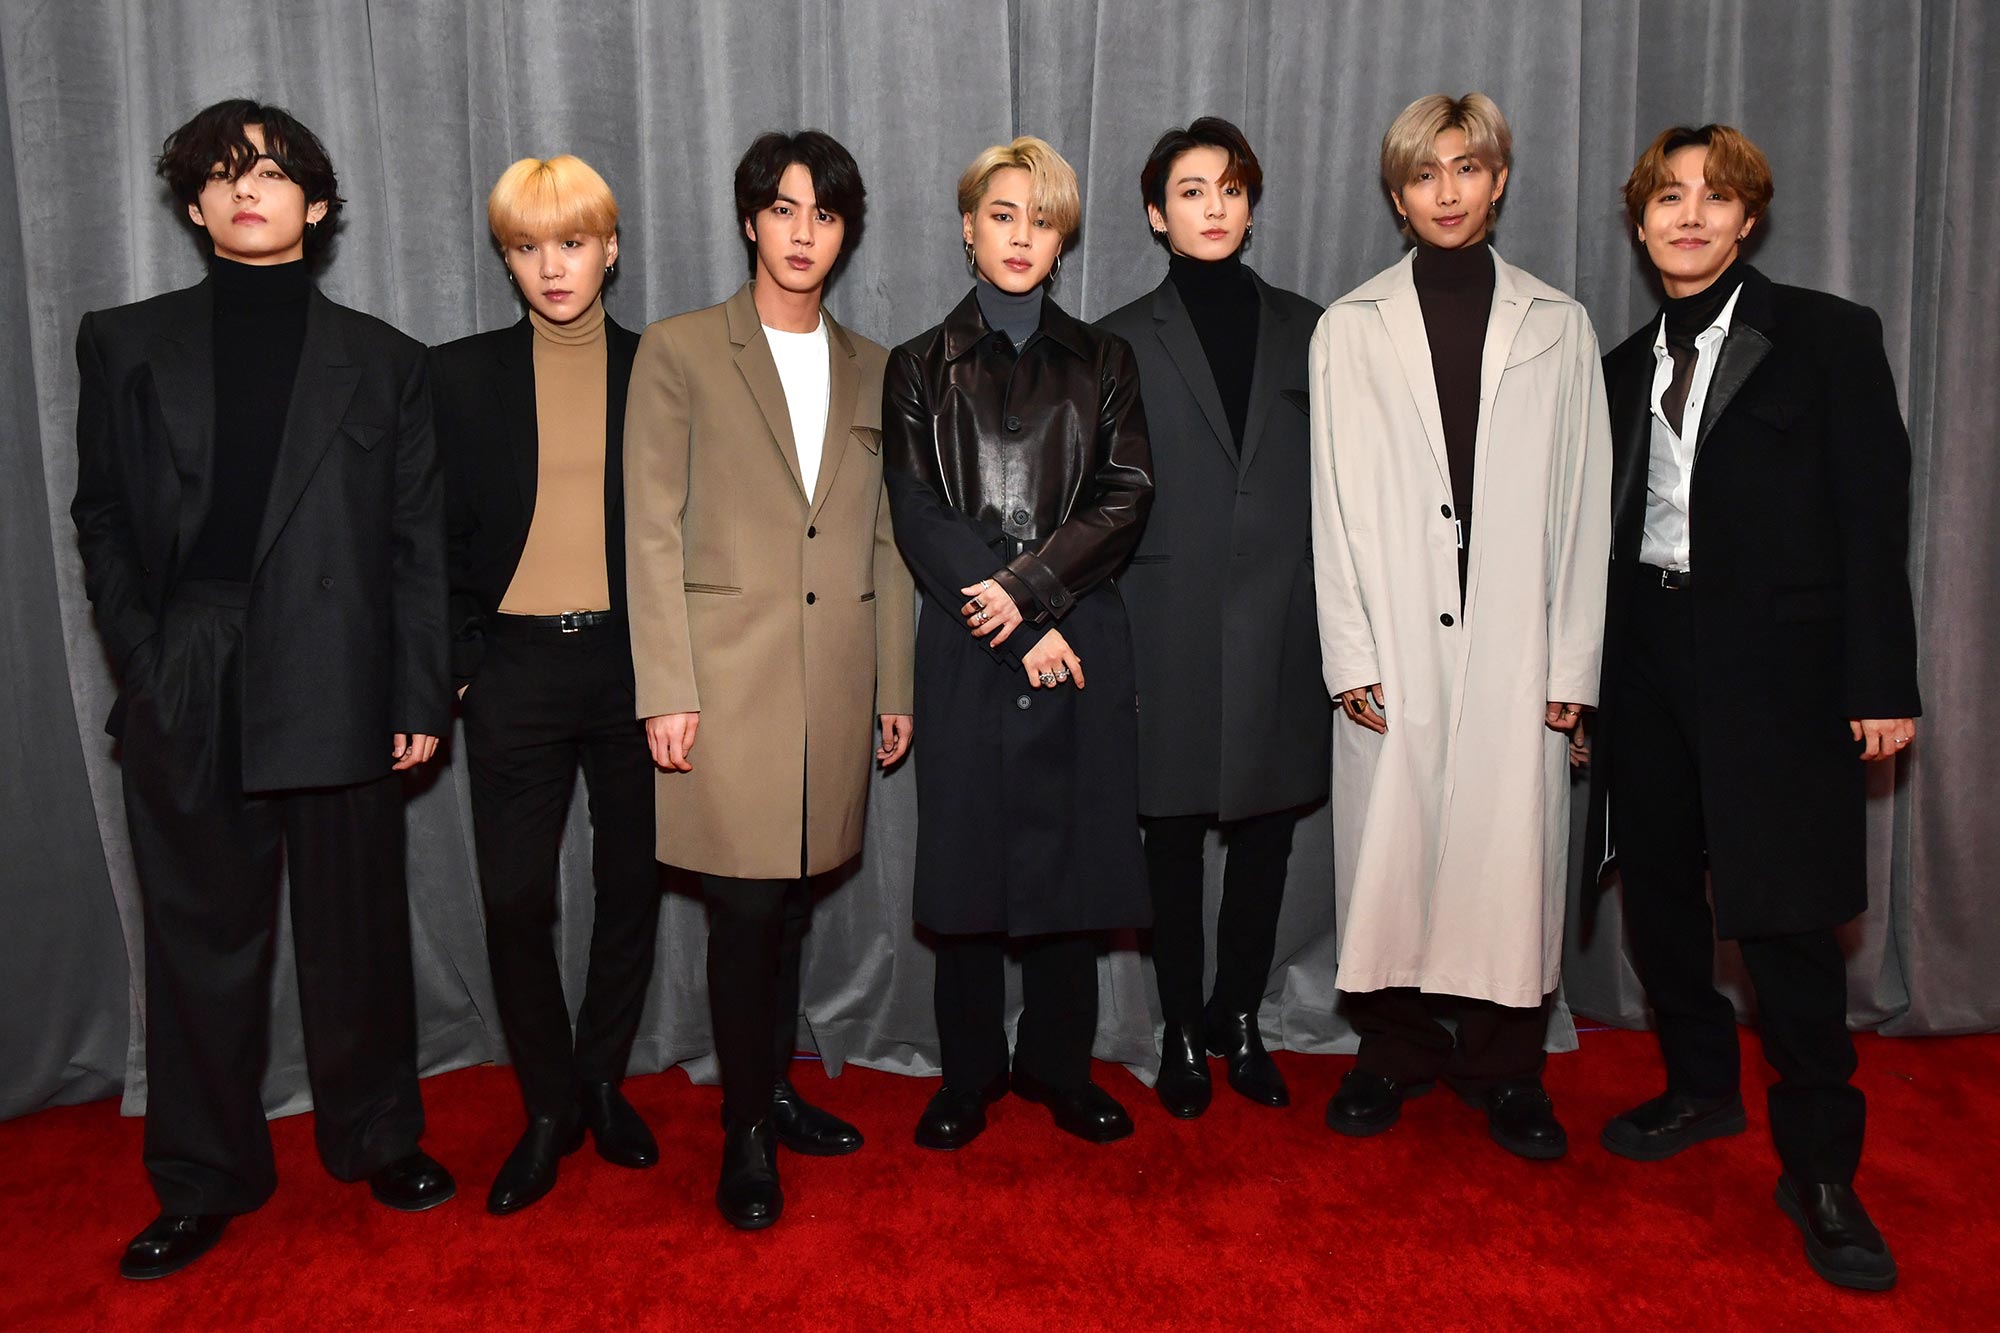 BTS share their own experiences as victims of racism in condemning violence against Asians